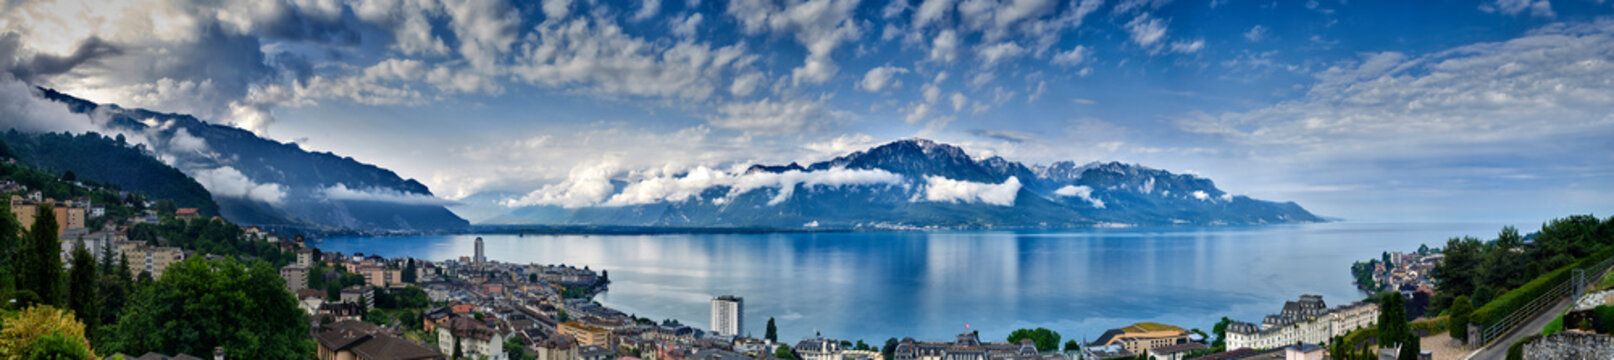 Panoramic view of mountain range and Lake Geneva from Montreux in Switzerland.